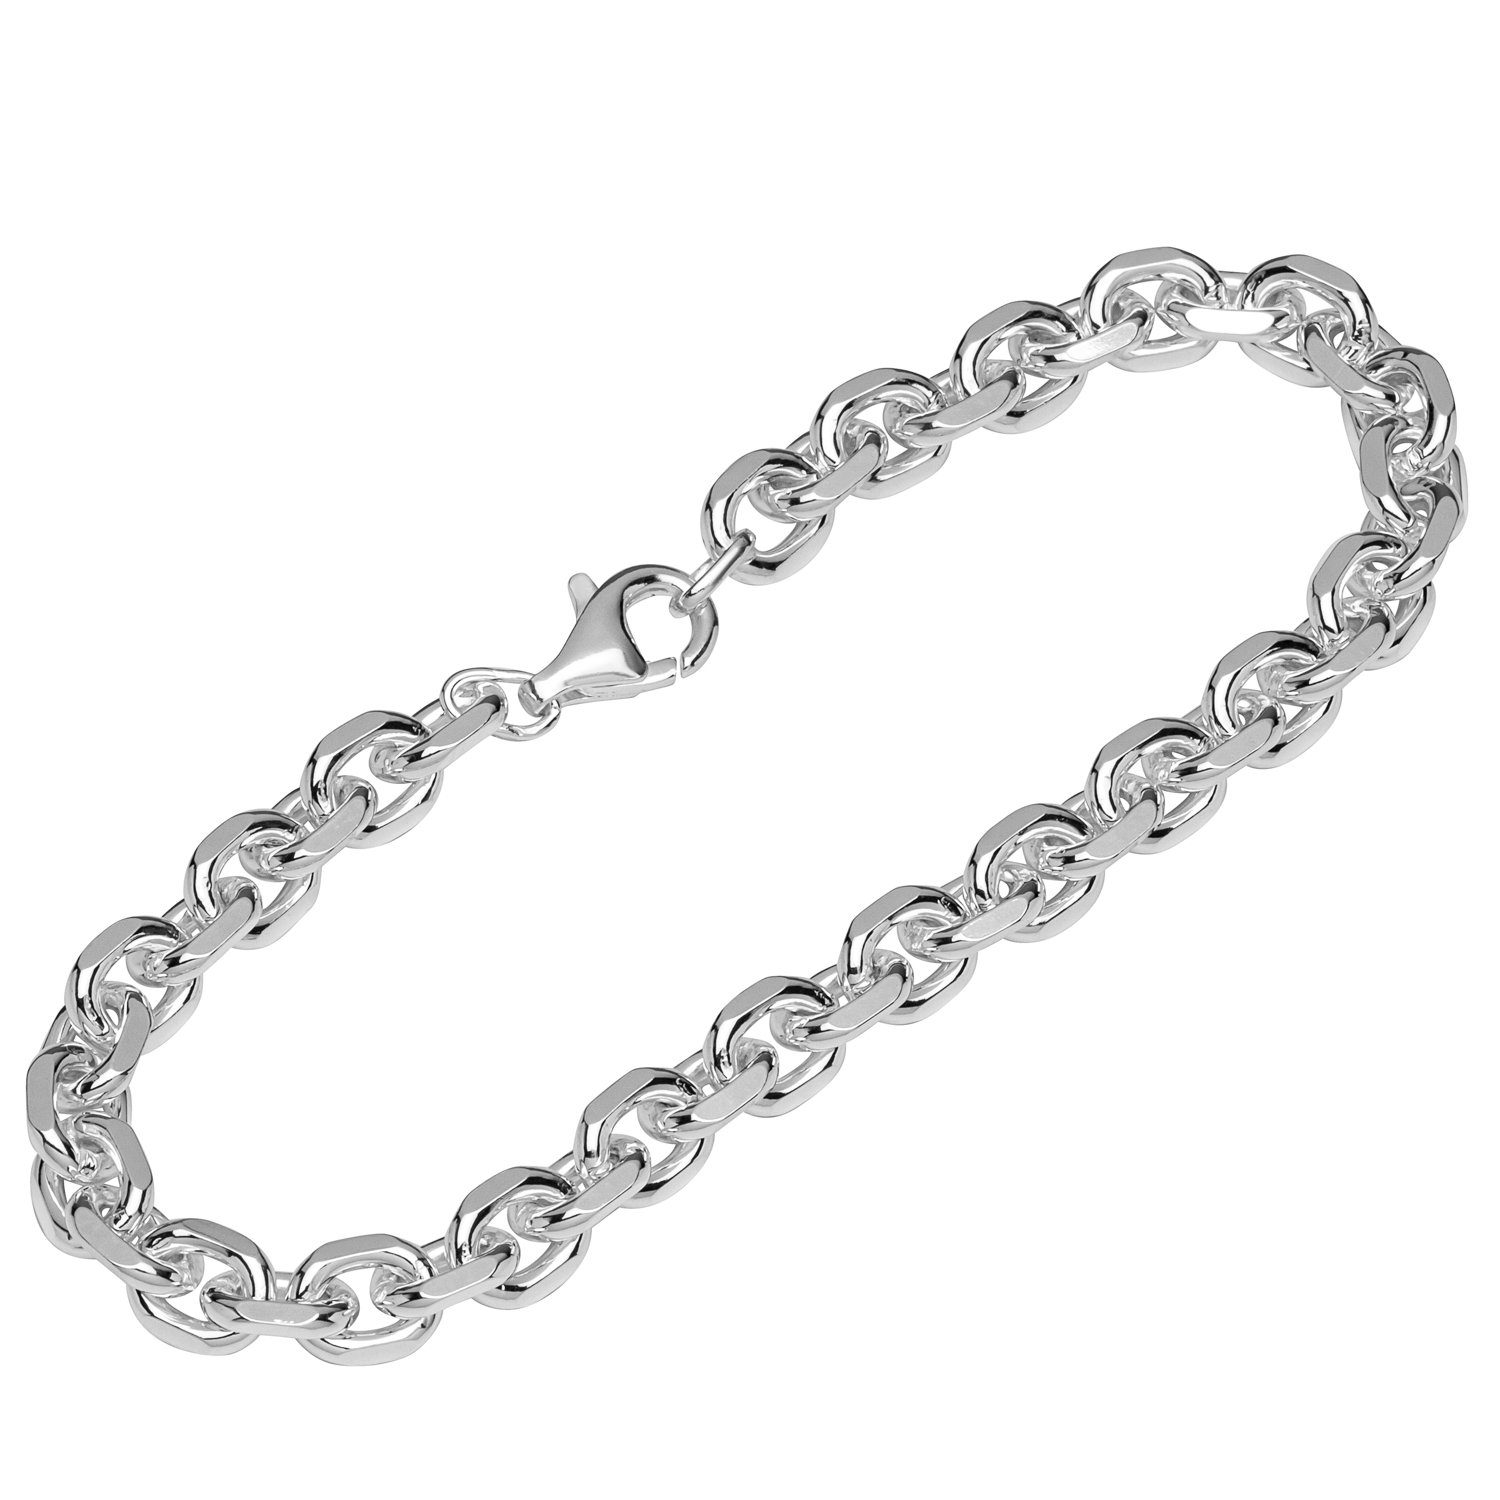 NKlaus Silberarmband Armband 925 Sterling Silber 22cm Ankerkette 4 fach (1 Stück), Made in Germany